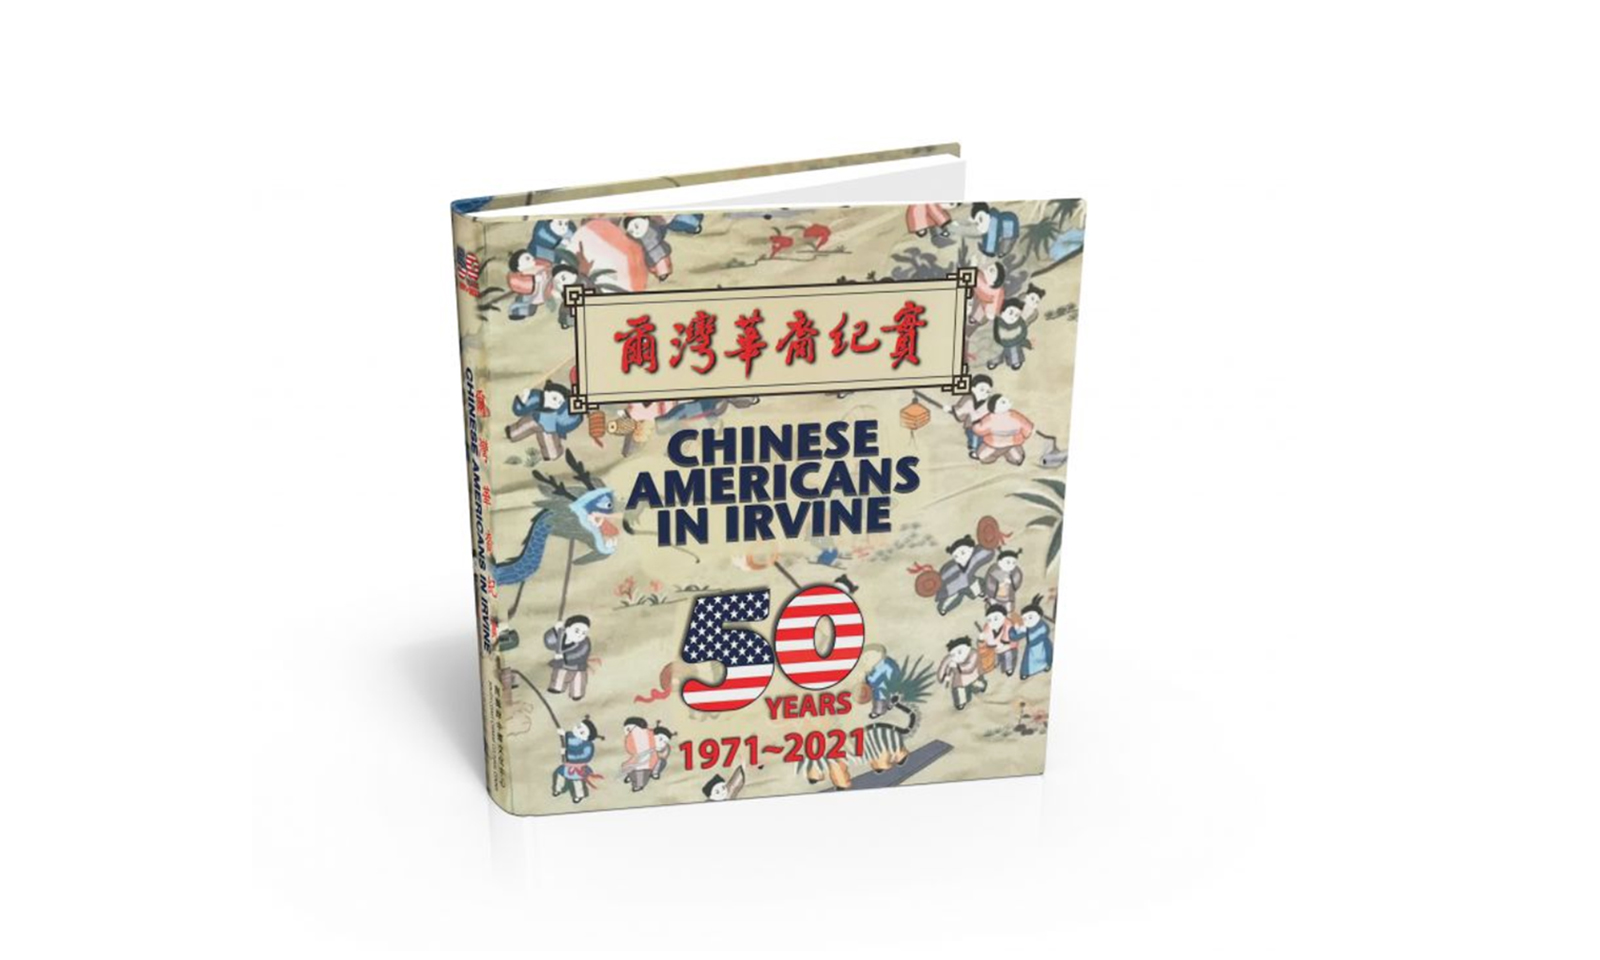 New book celebrates history of Chinese-Americans in Irvine